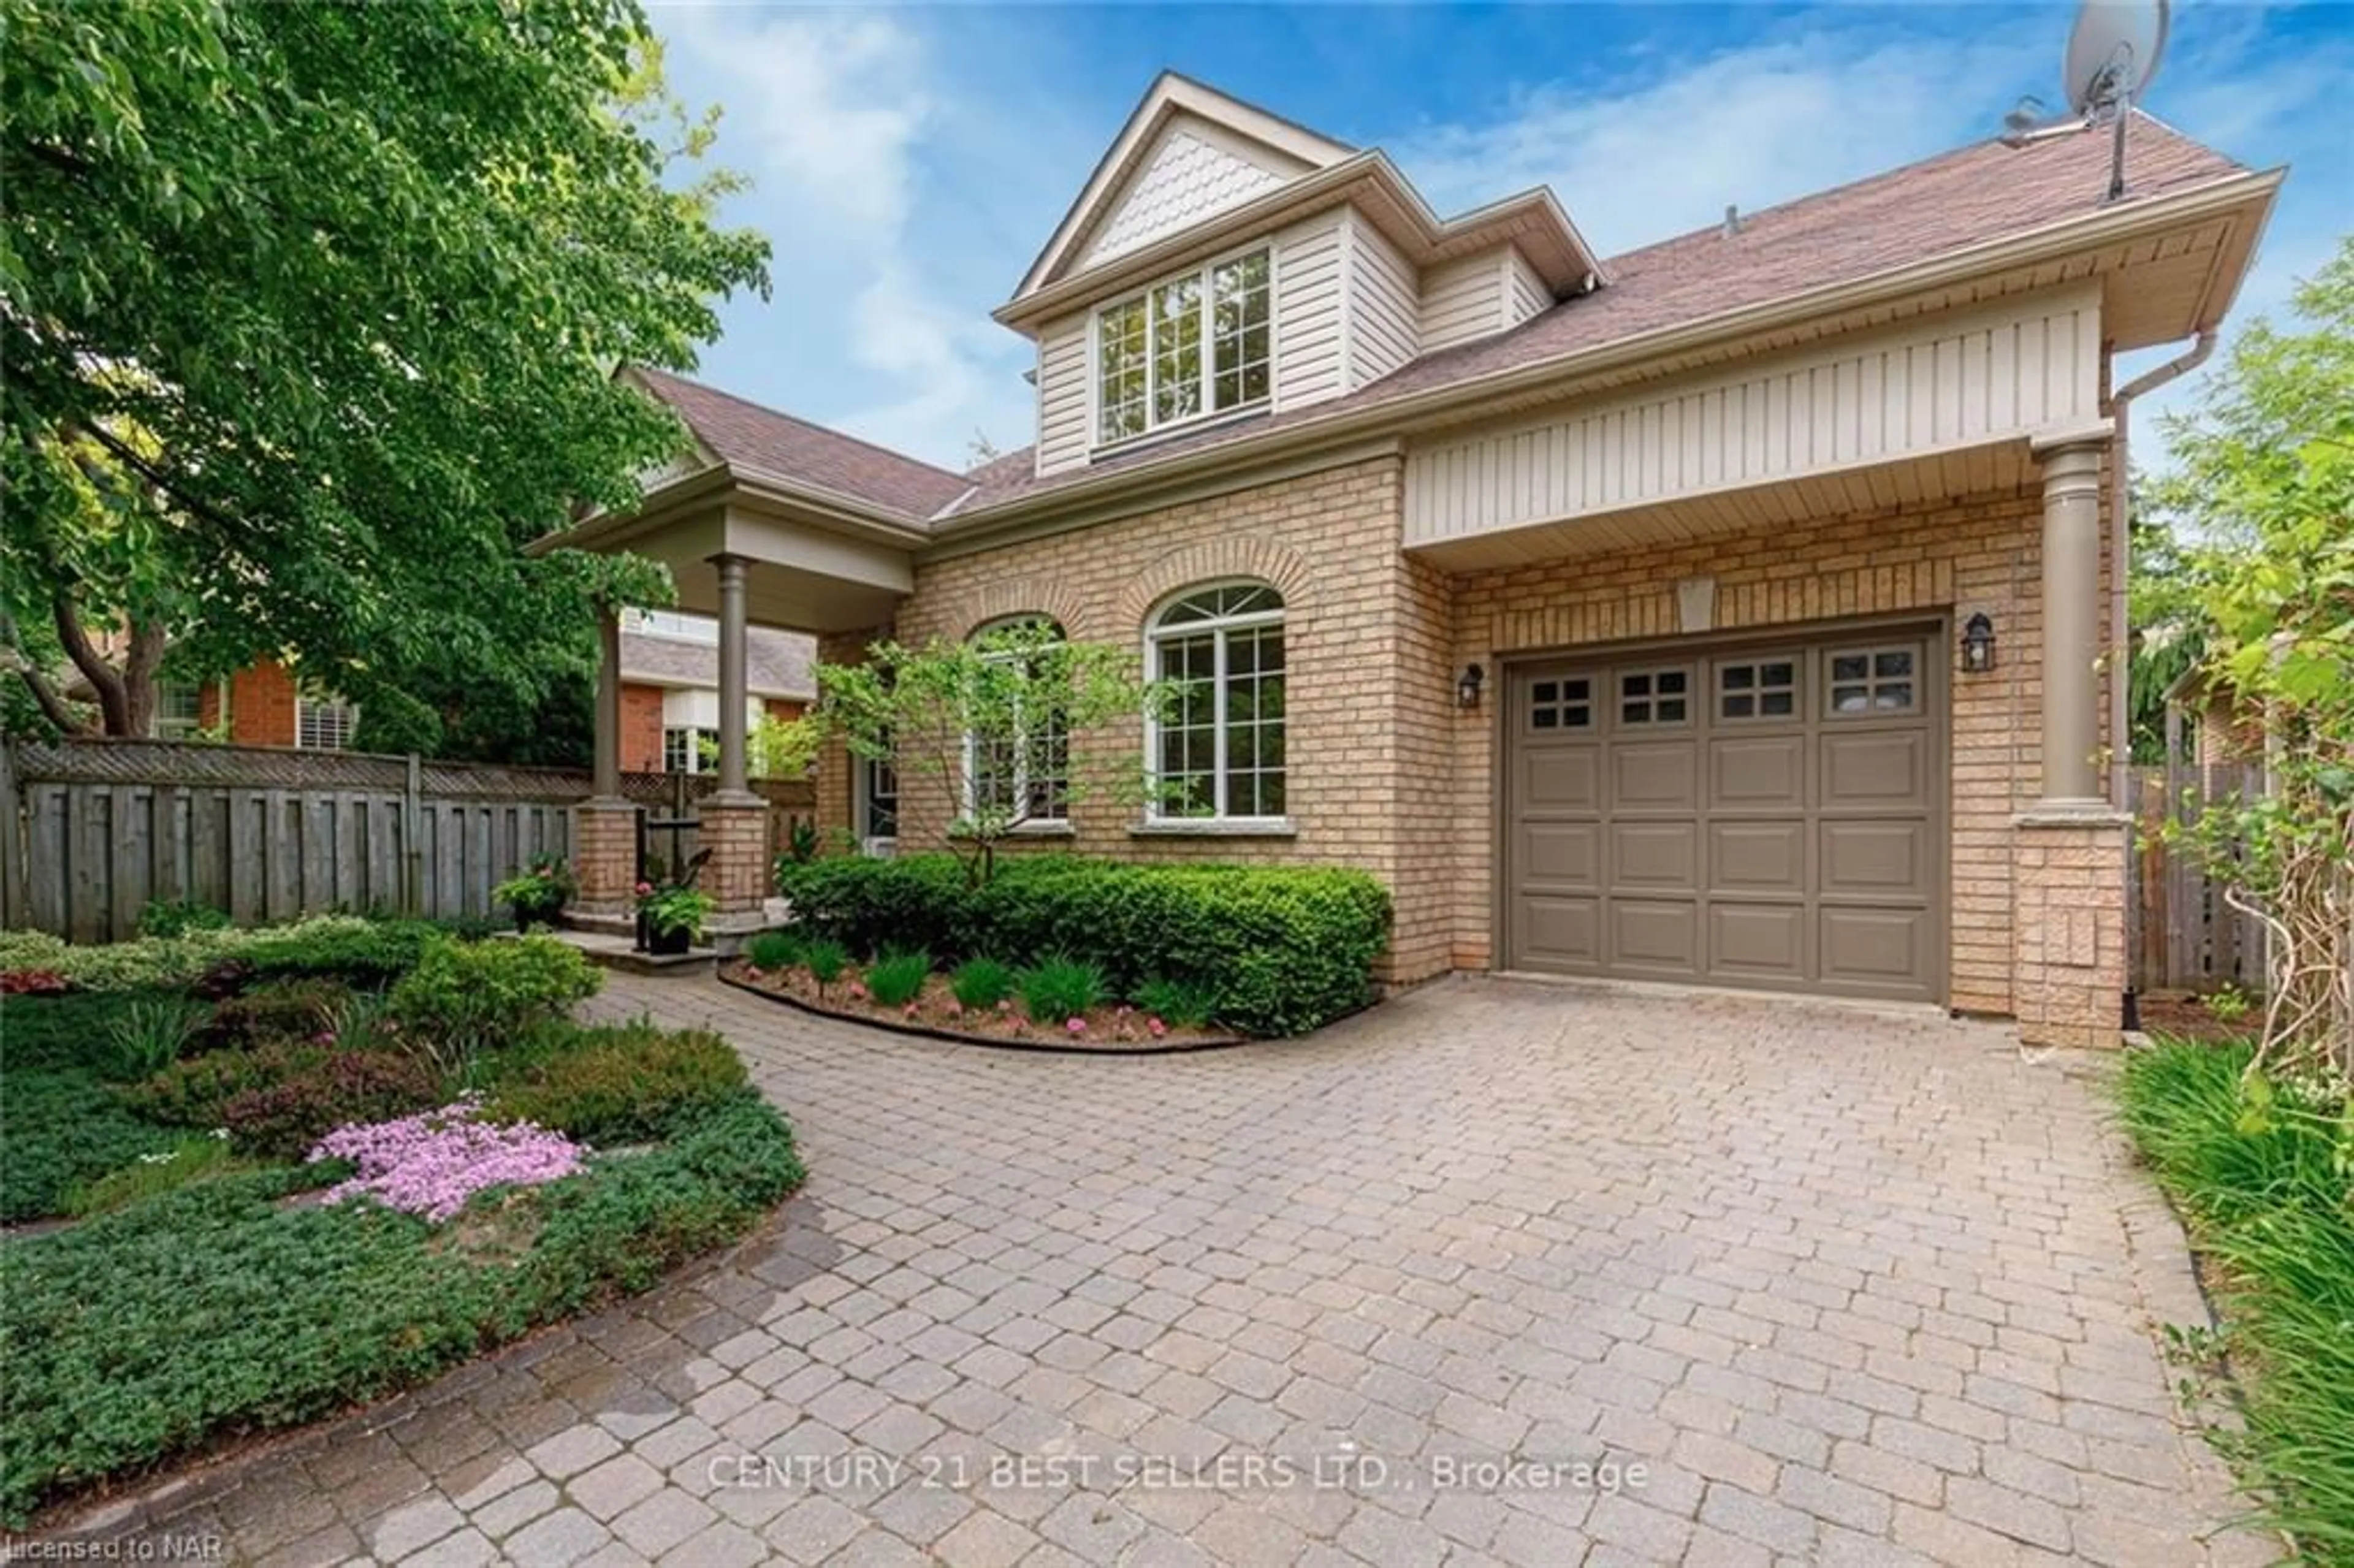 Home with brick exterior material for 22 Callary Cres, Collingwood Ontario L9Y 4Y1